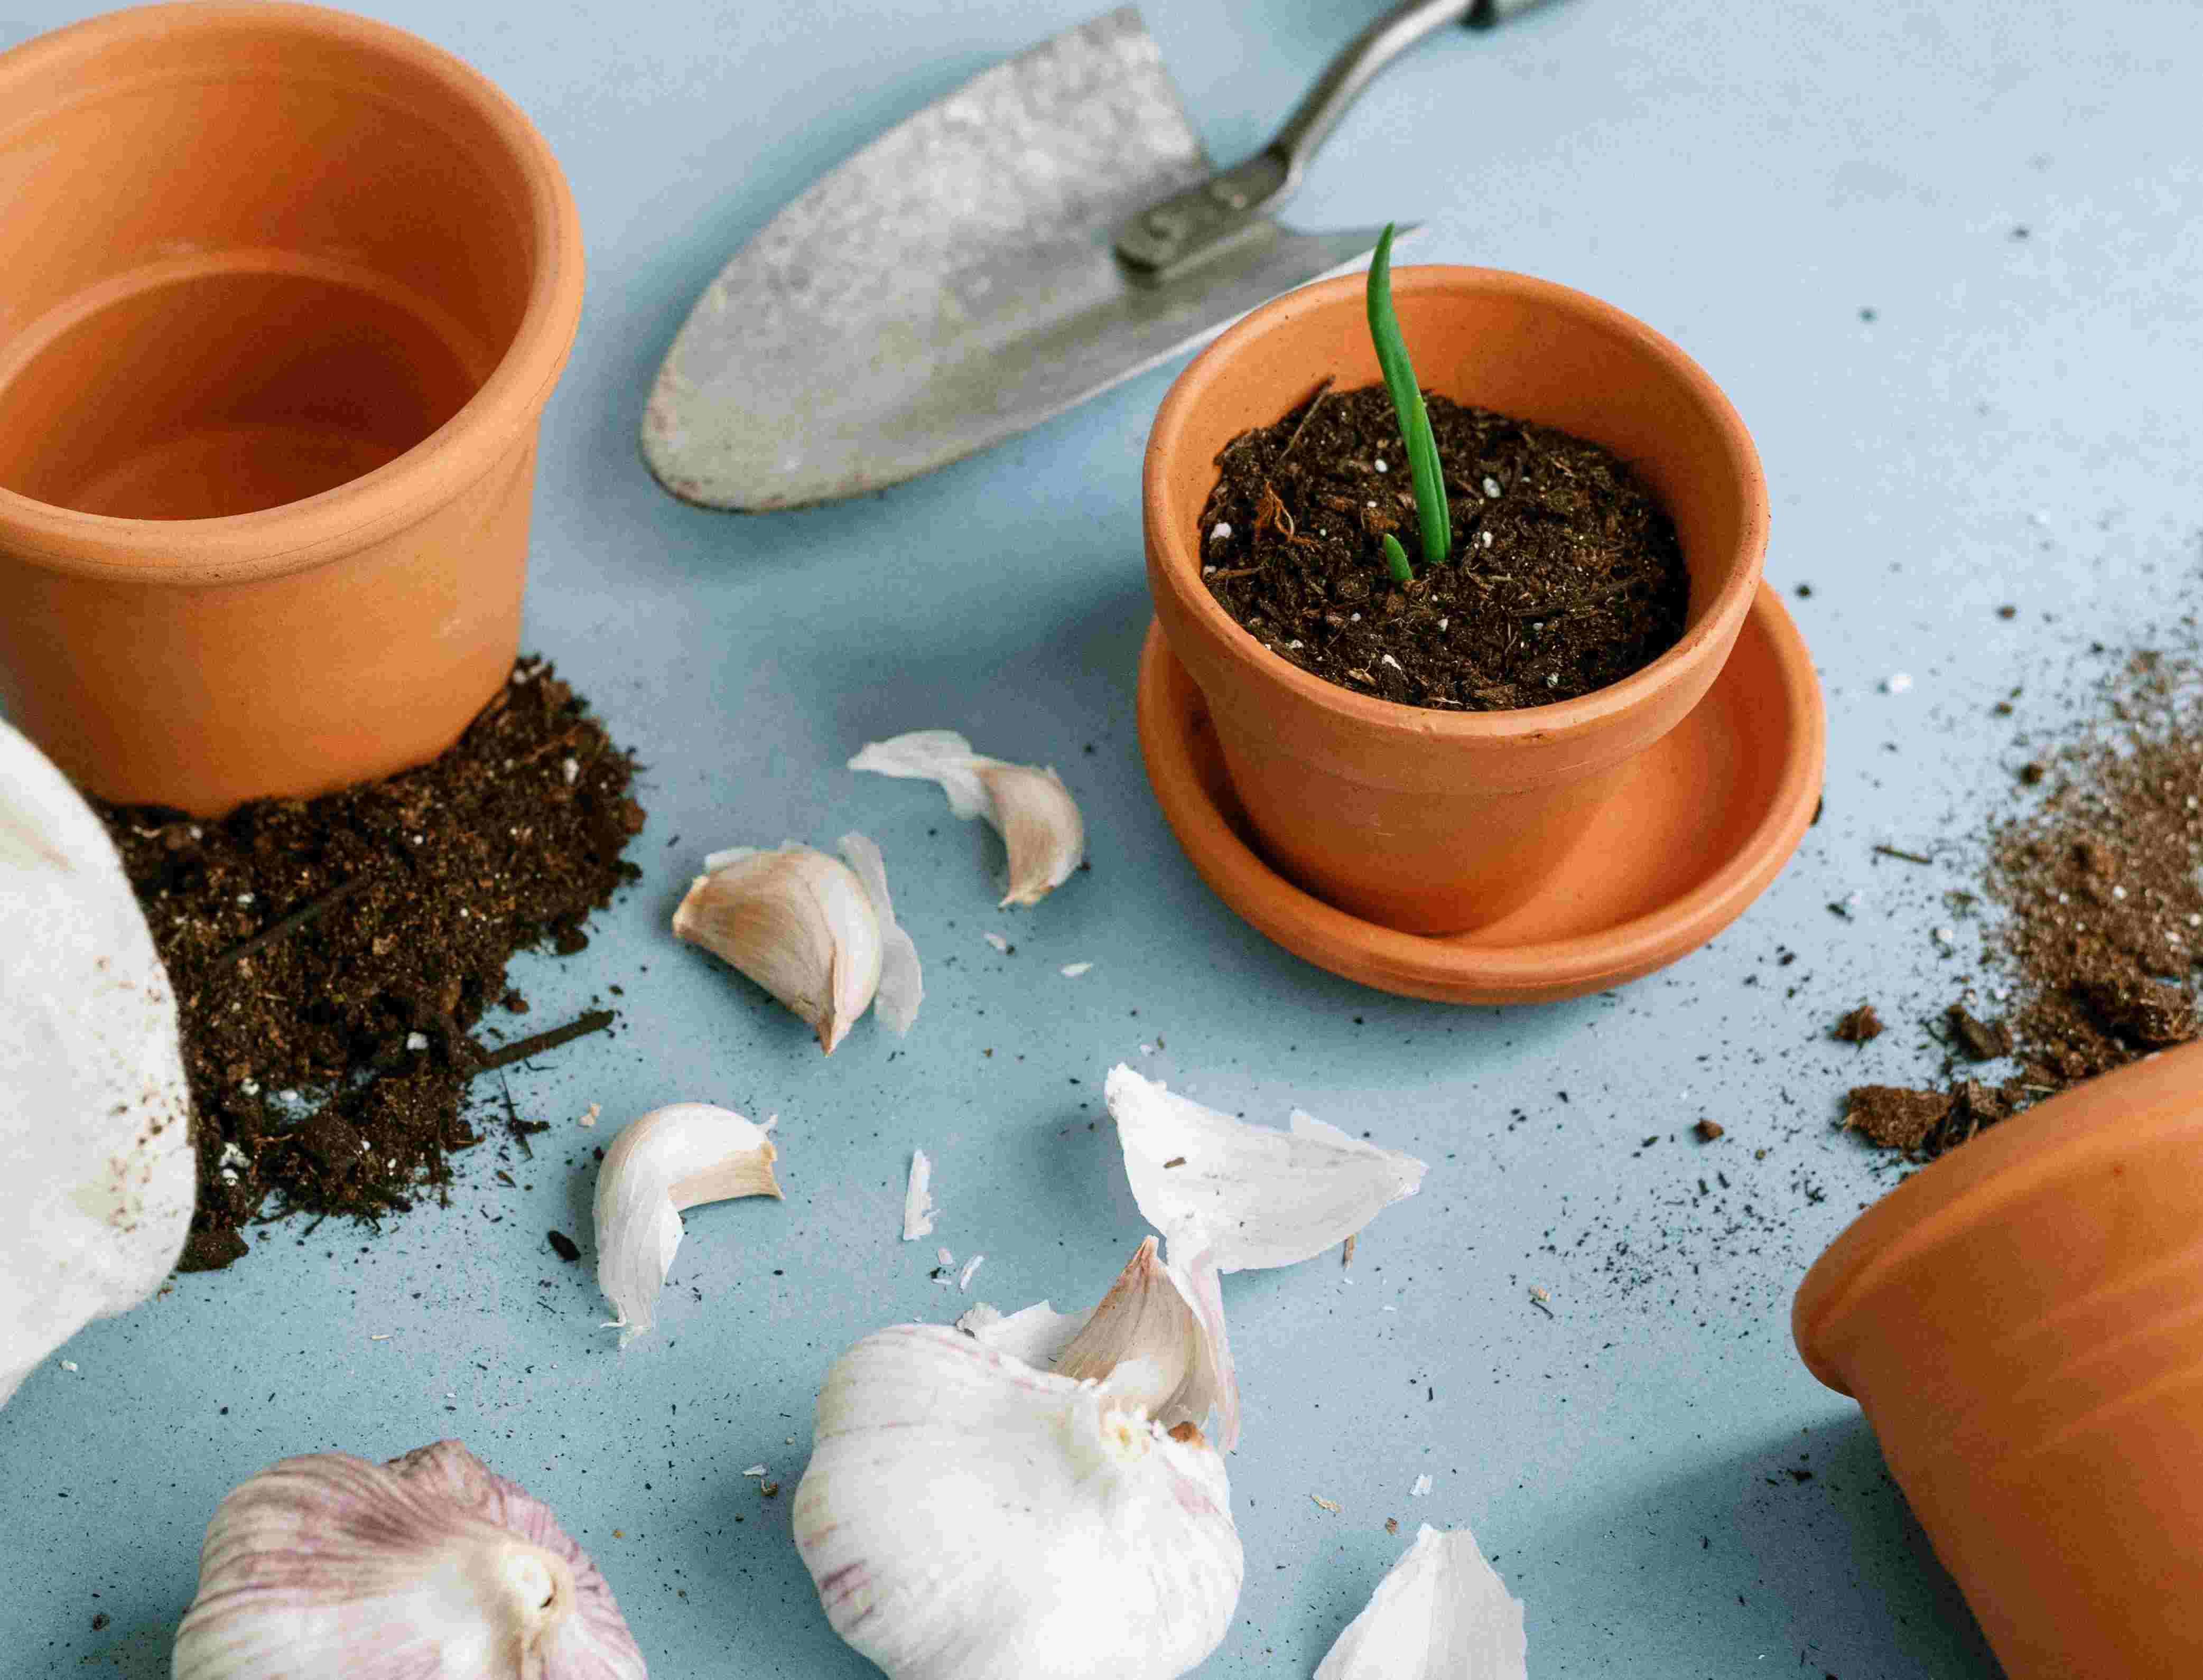 How To Prepare Garlic Cloves For Planting